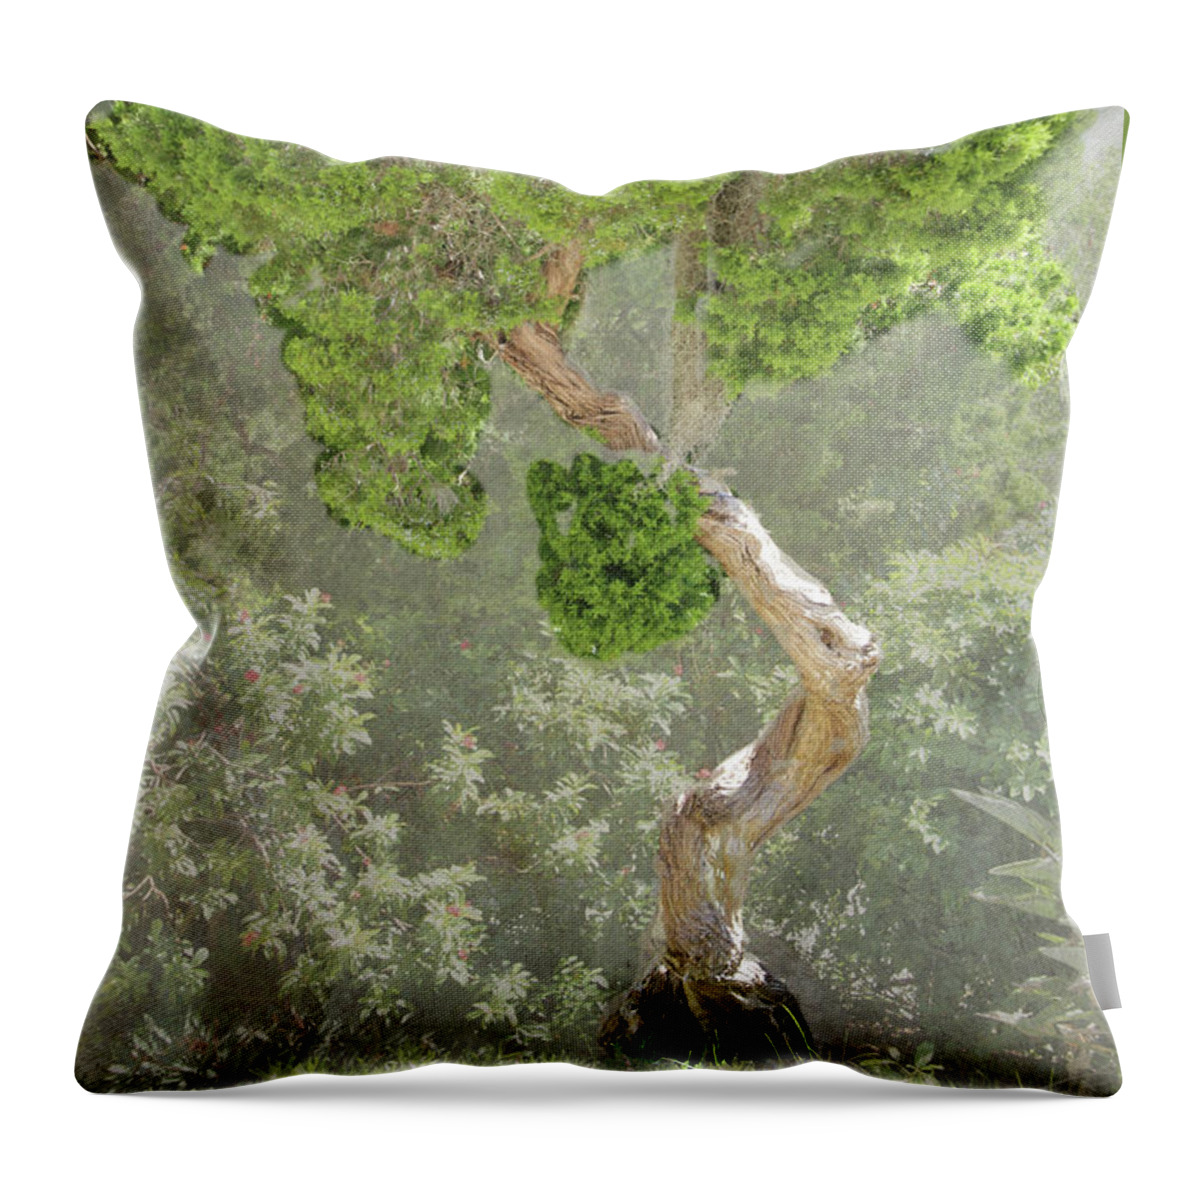 Tree Throw Pillow featuring the photograph Bunny Tree by Rosalie Scanlon